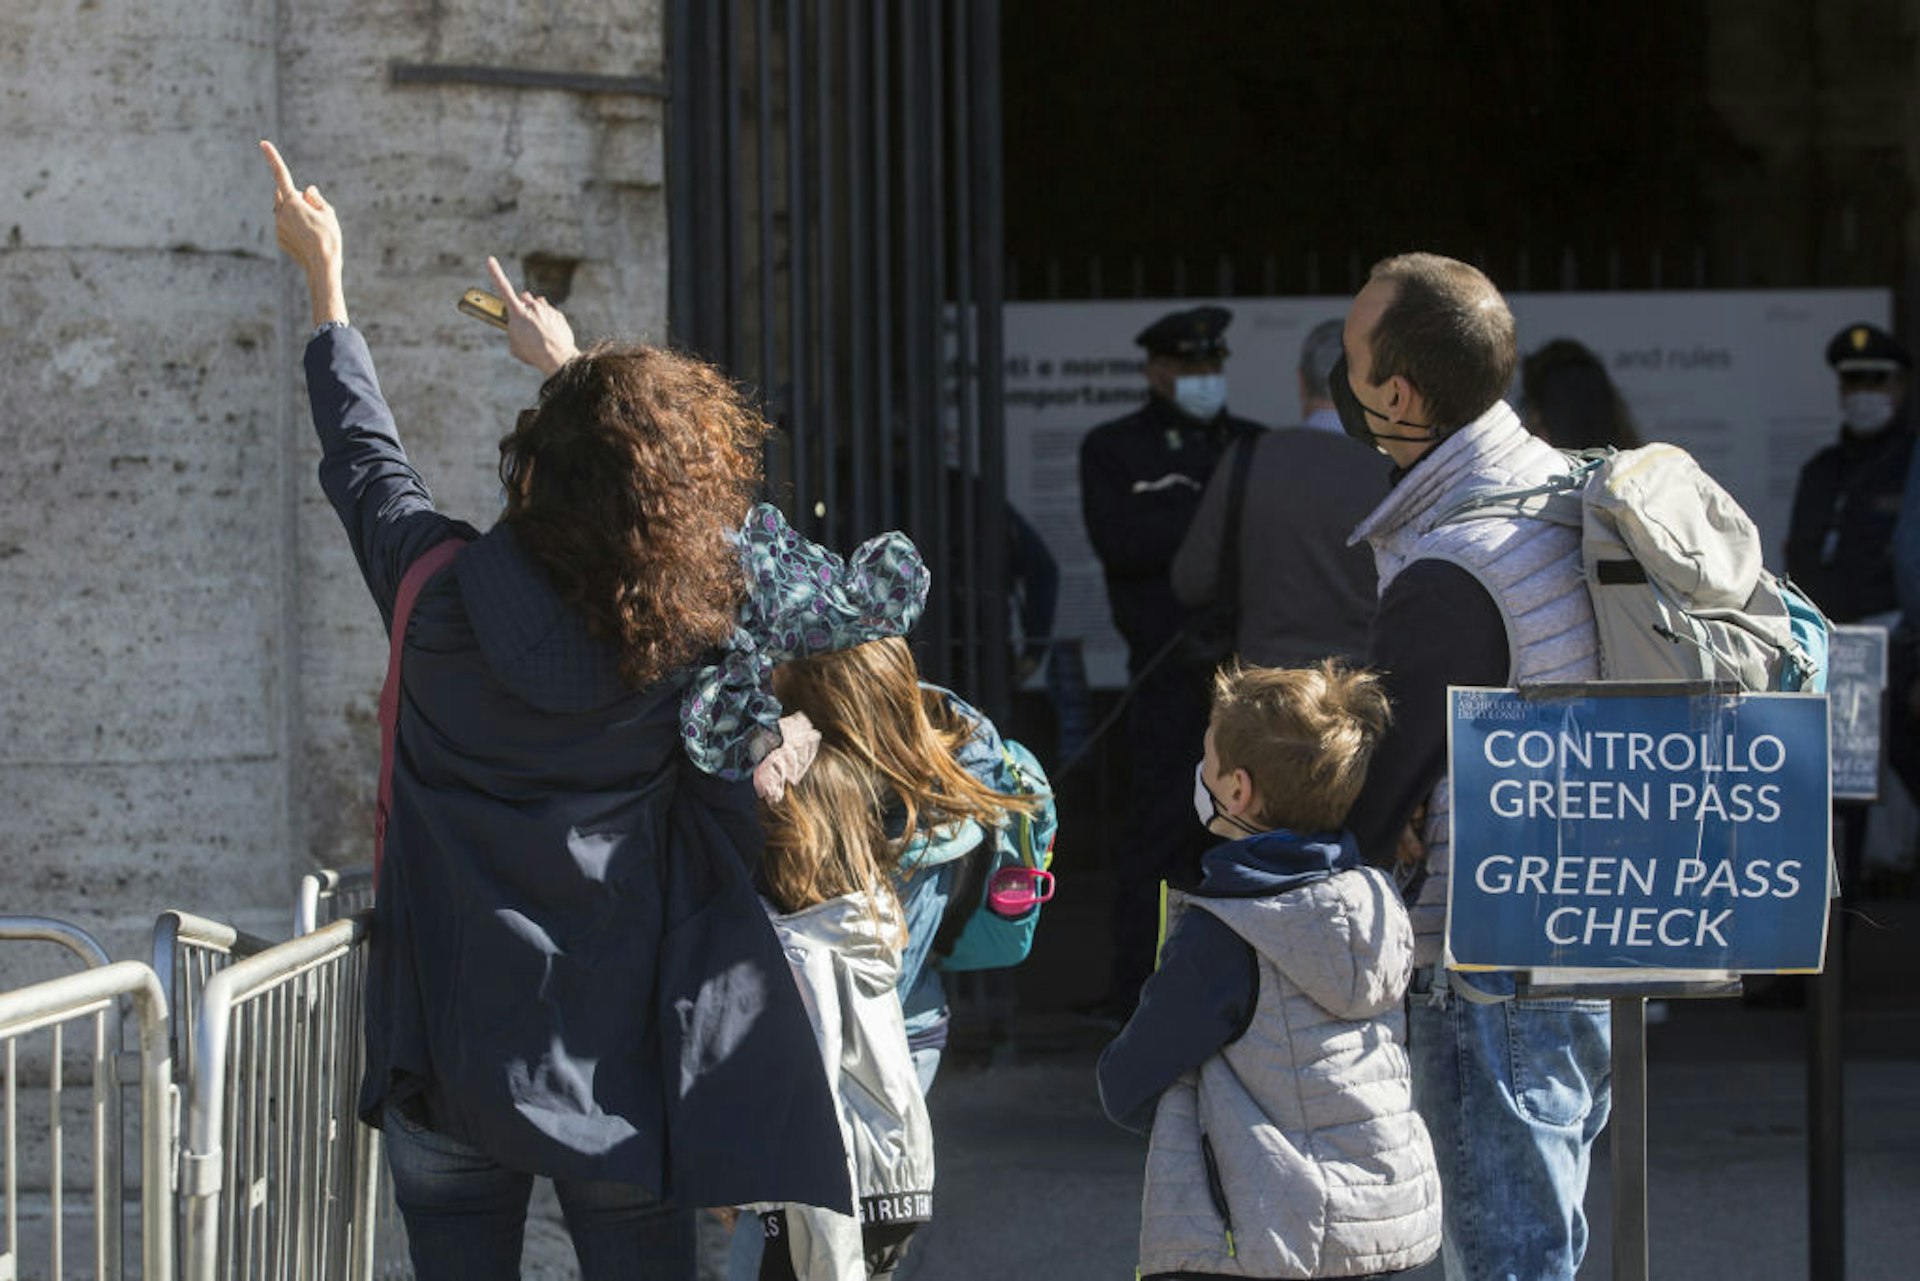 Visitors wait in line to have their digital COVID-19 "Green Pass" checked before entering the Colosseum in Rome